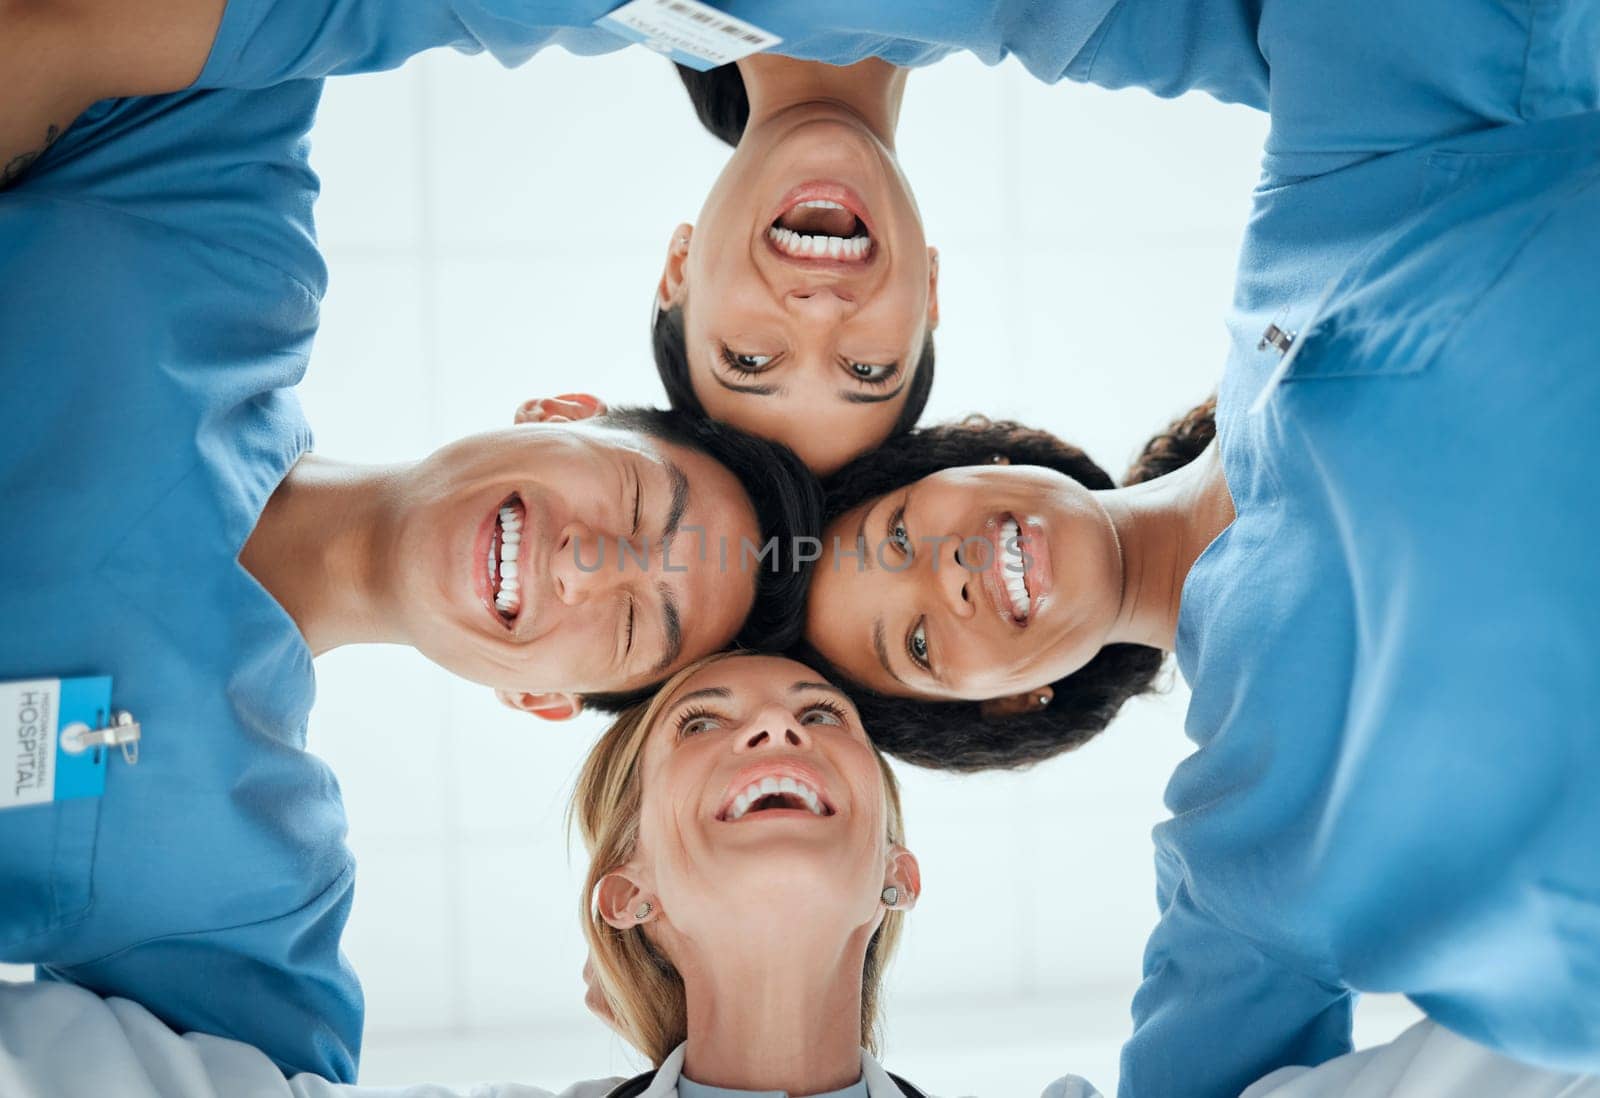 Smile, teamwork or faces of doctors in huddle laughing in collaboration together for healthcare goals. Low angle, funny team building or happy medical nurses with group support, motivation or mission by YuriArcurs